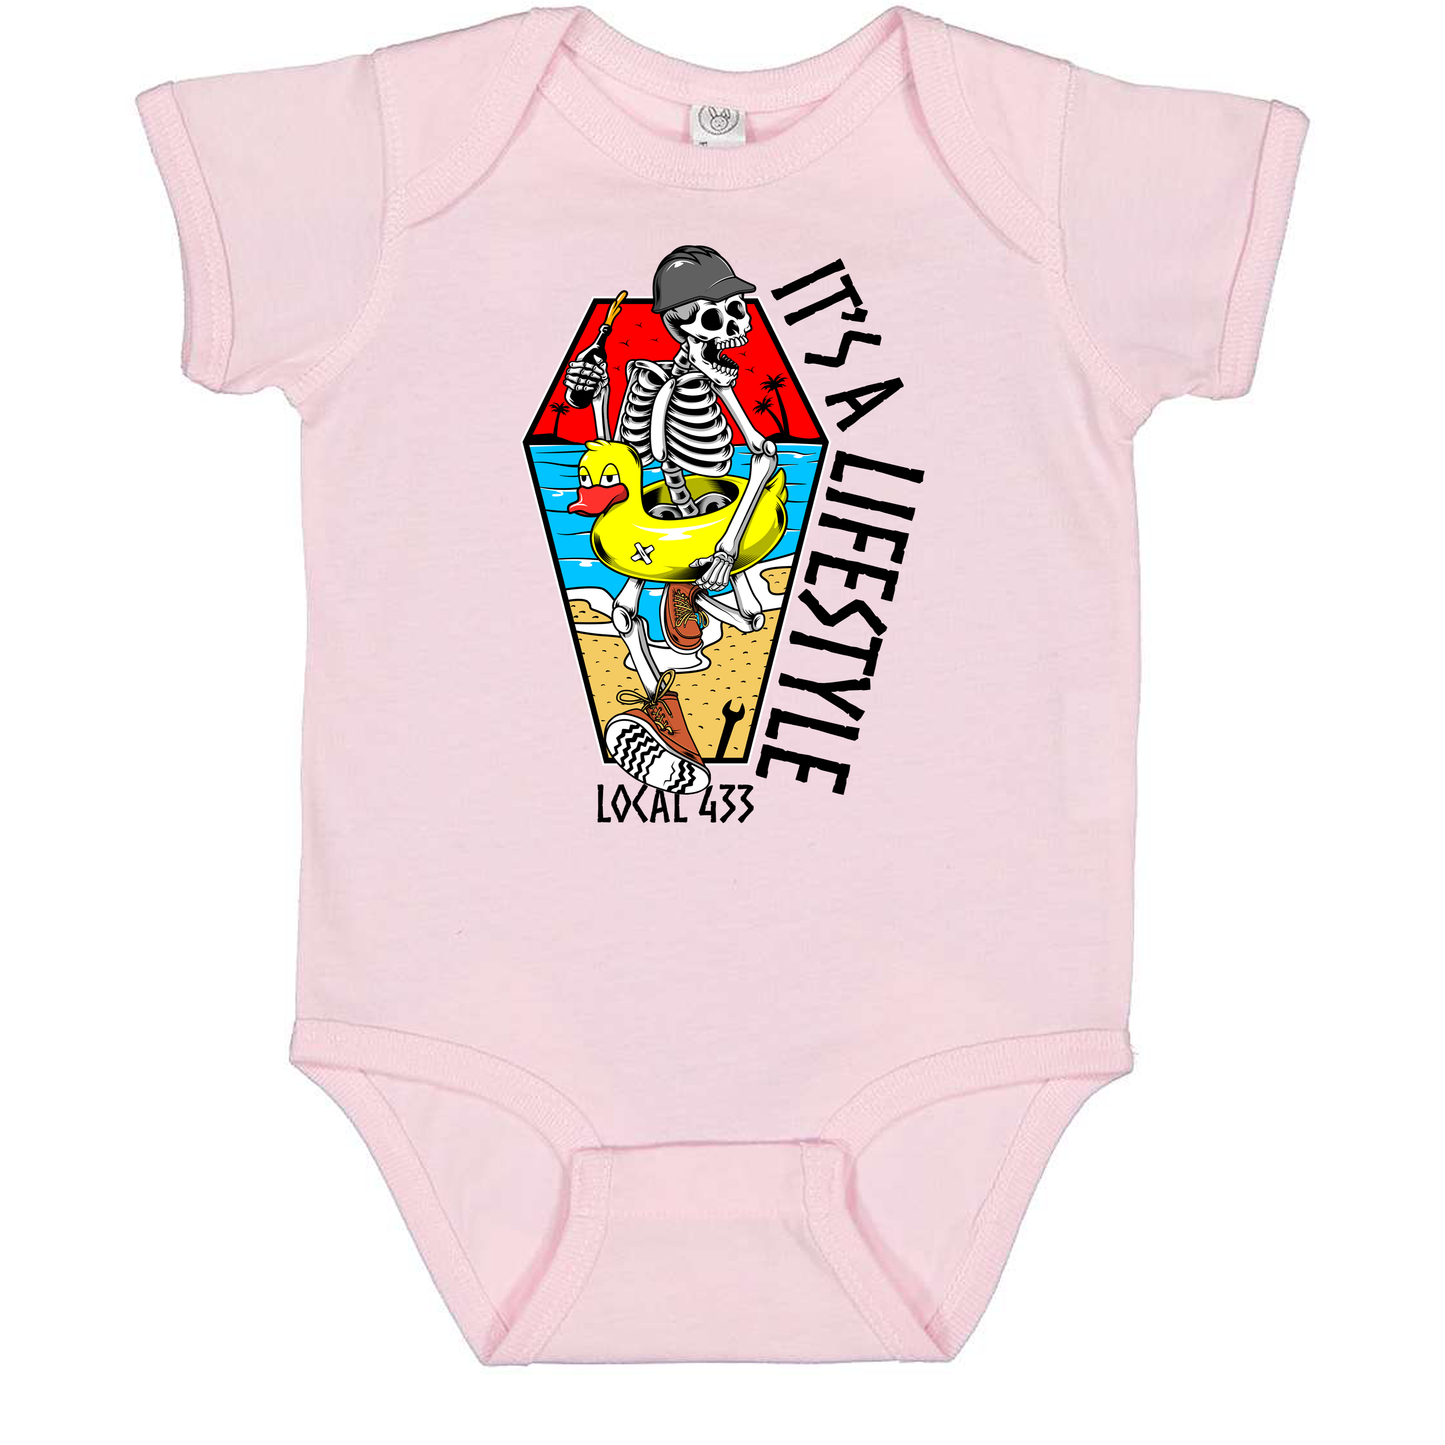 ITS A LIFESTYLE 433 ONESIE